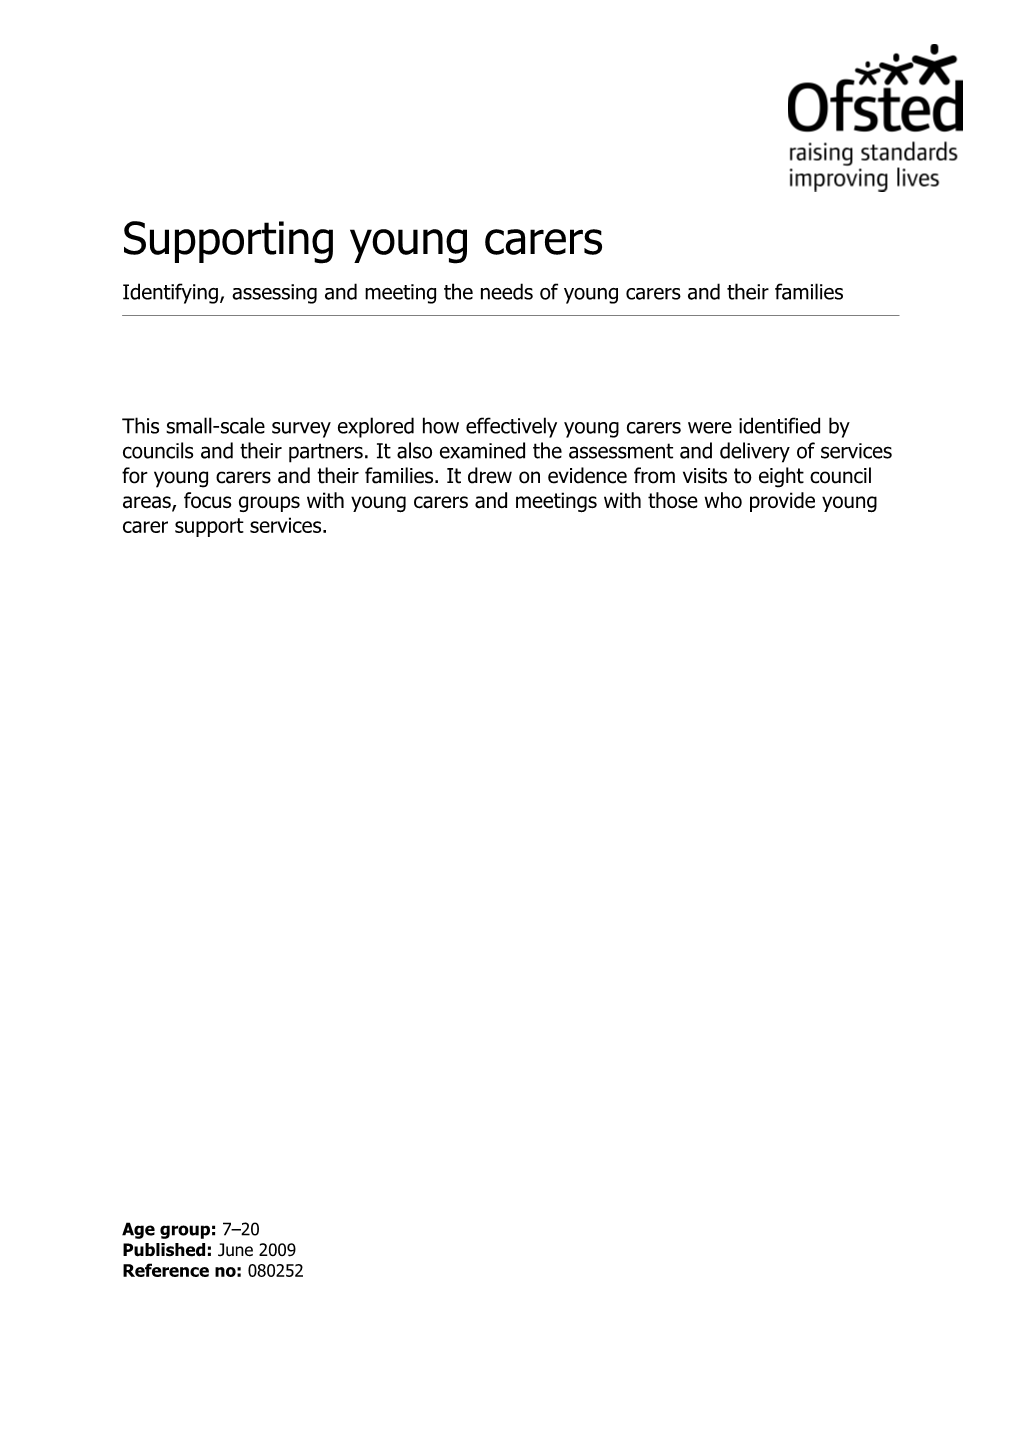 Identifying, Assessing and Meeting the Needs of Young Carers and Their Families